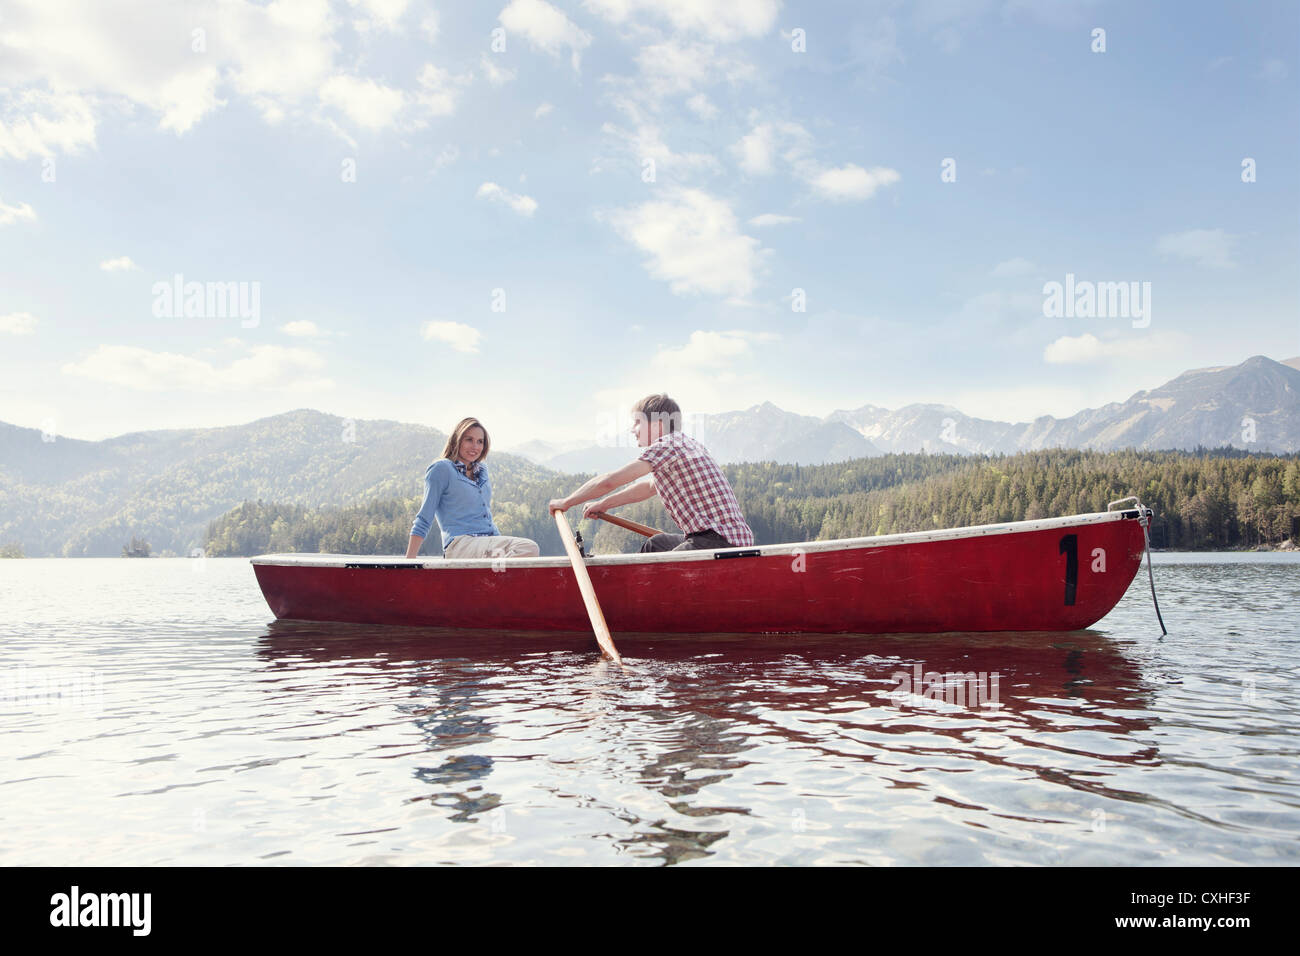 Germany, Bavaria, Couple in rowing boat, smiling Stock Photo